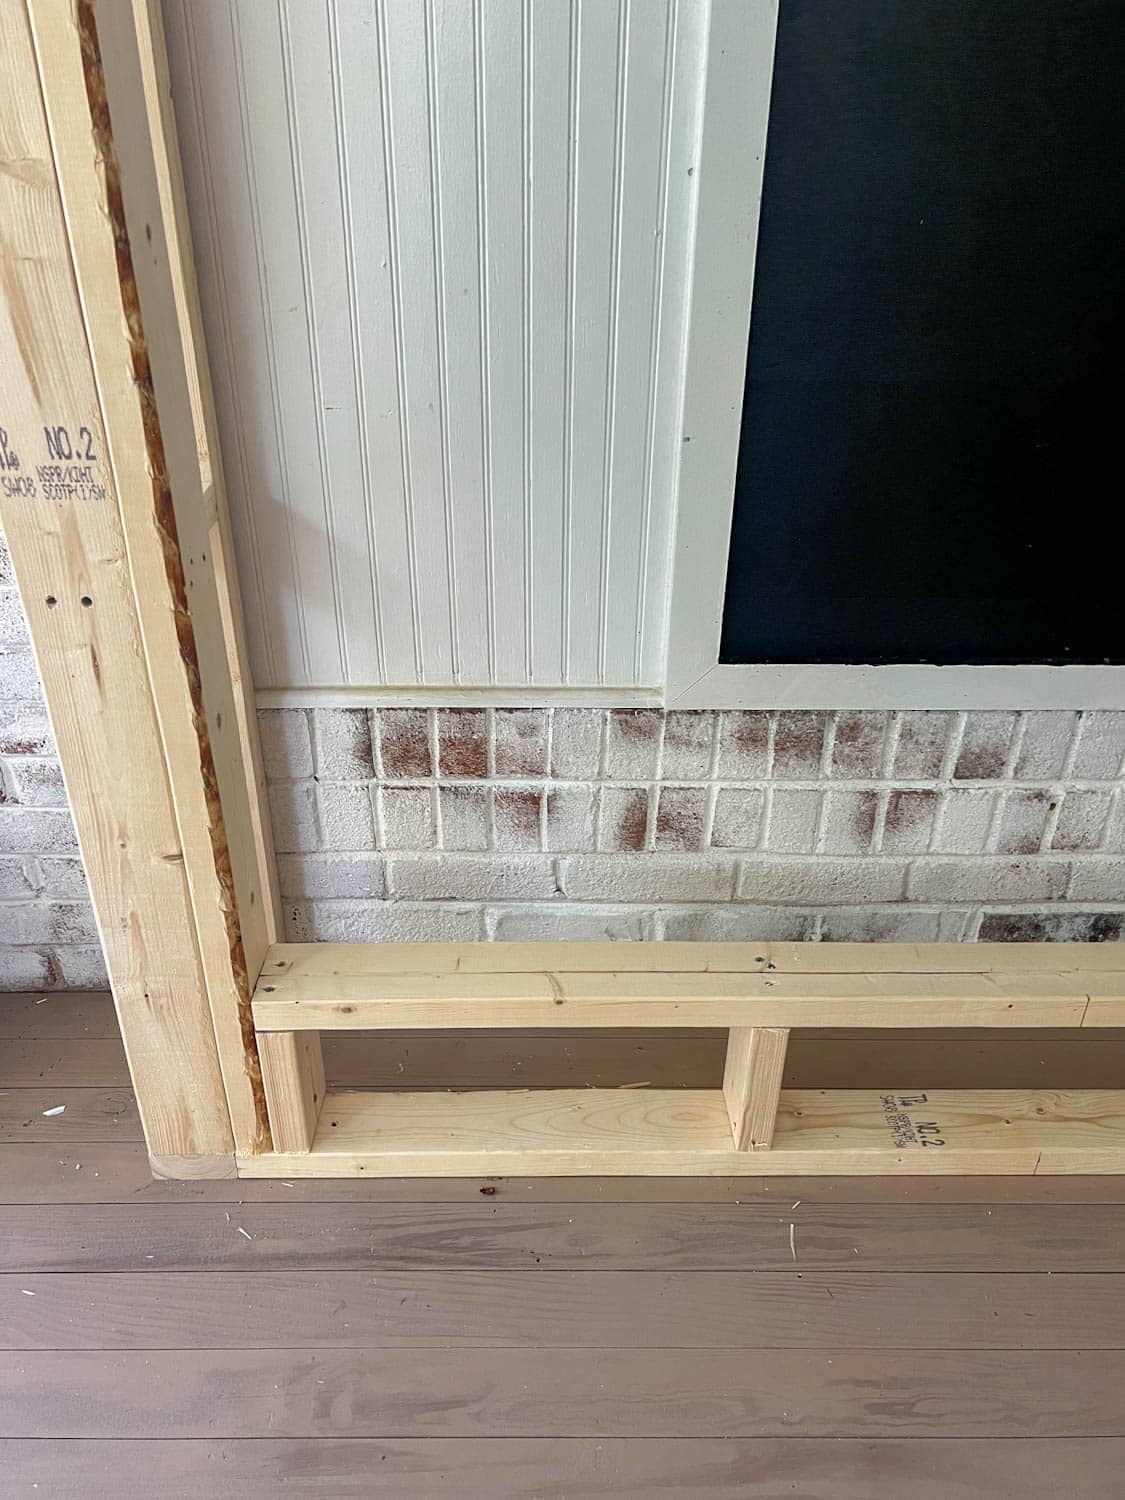 footer board of DIY fireplace frame